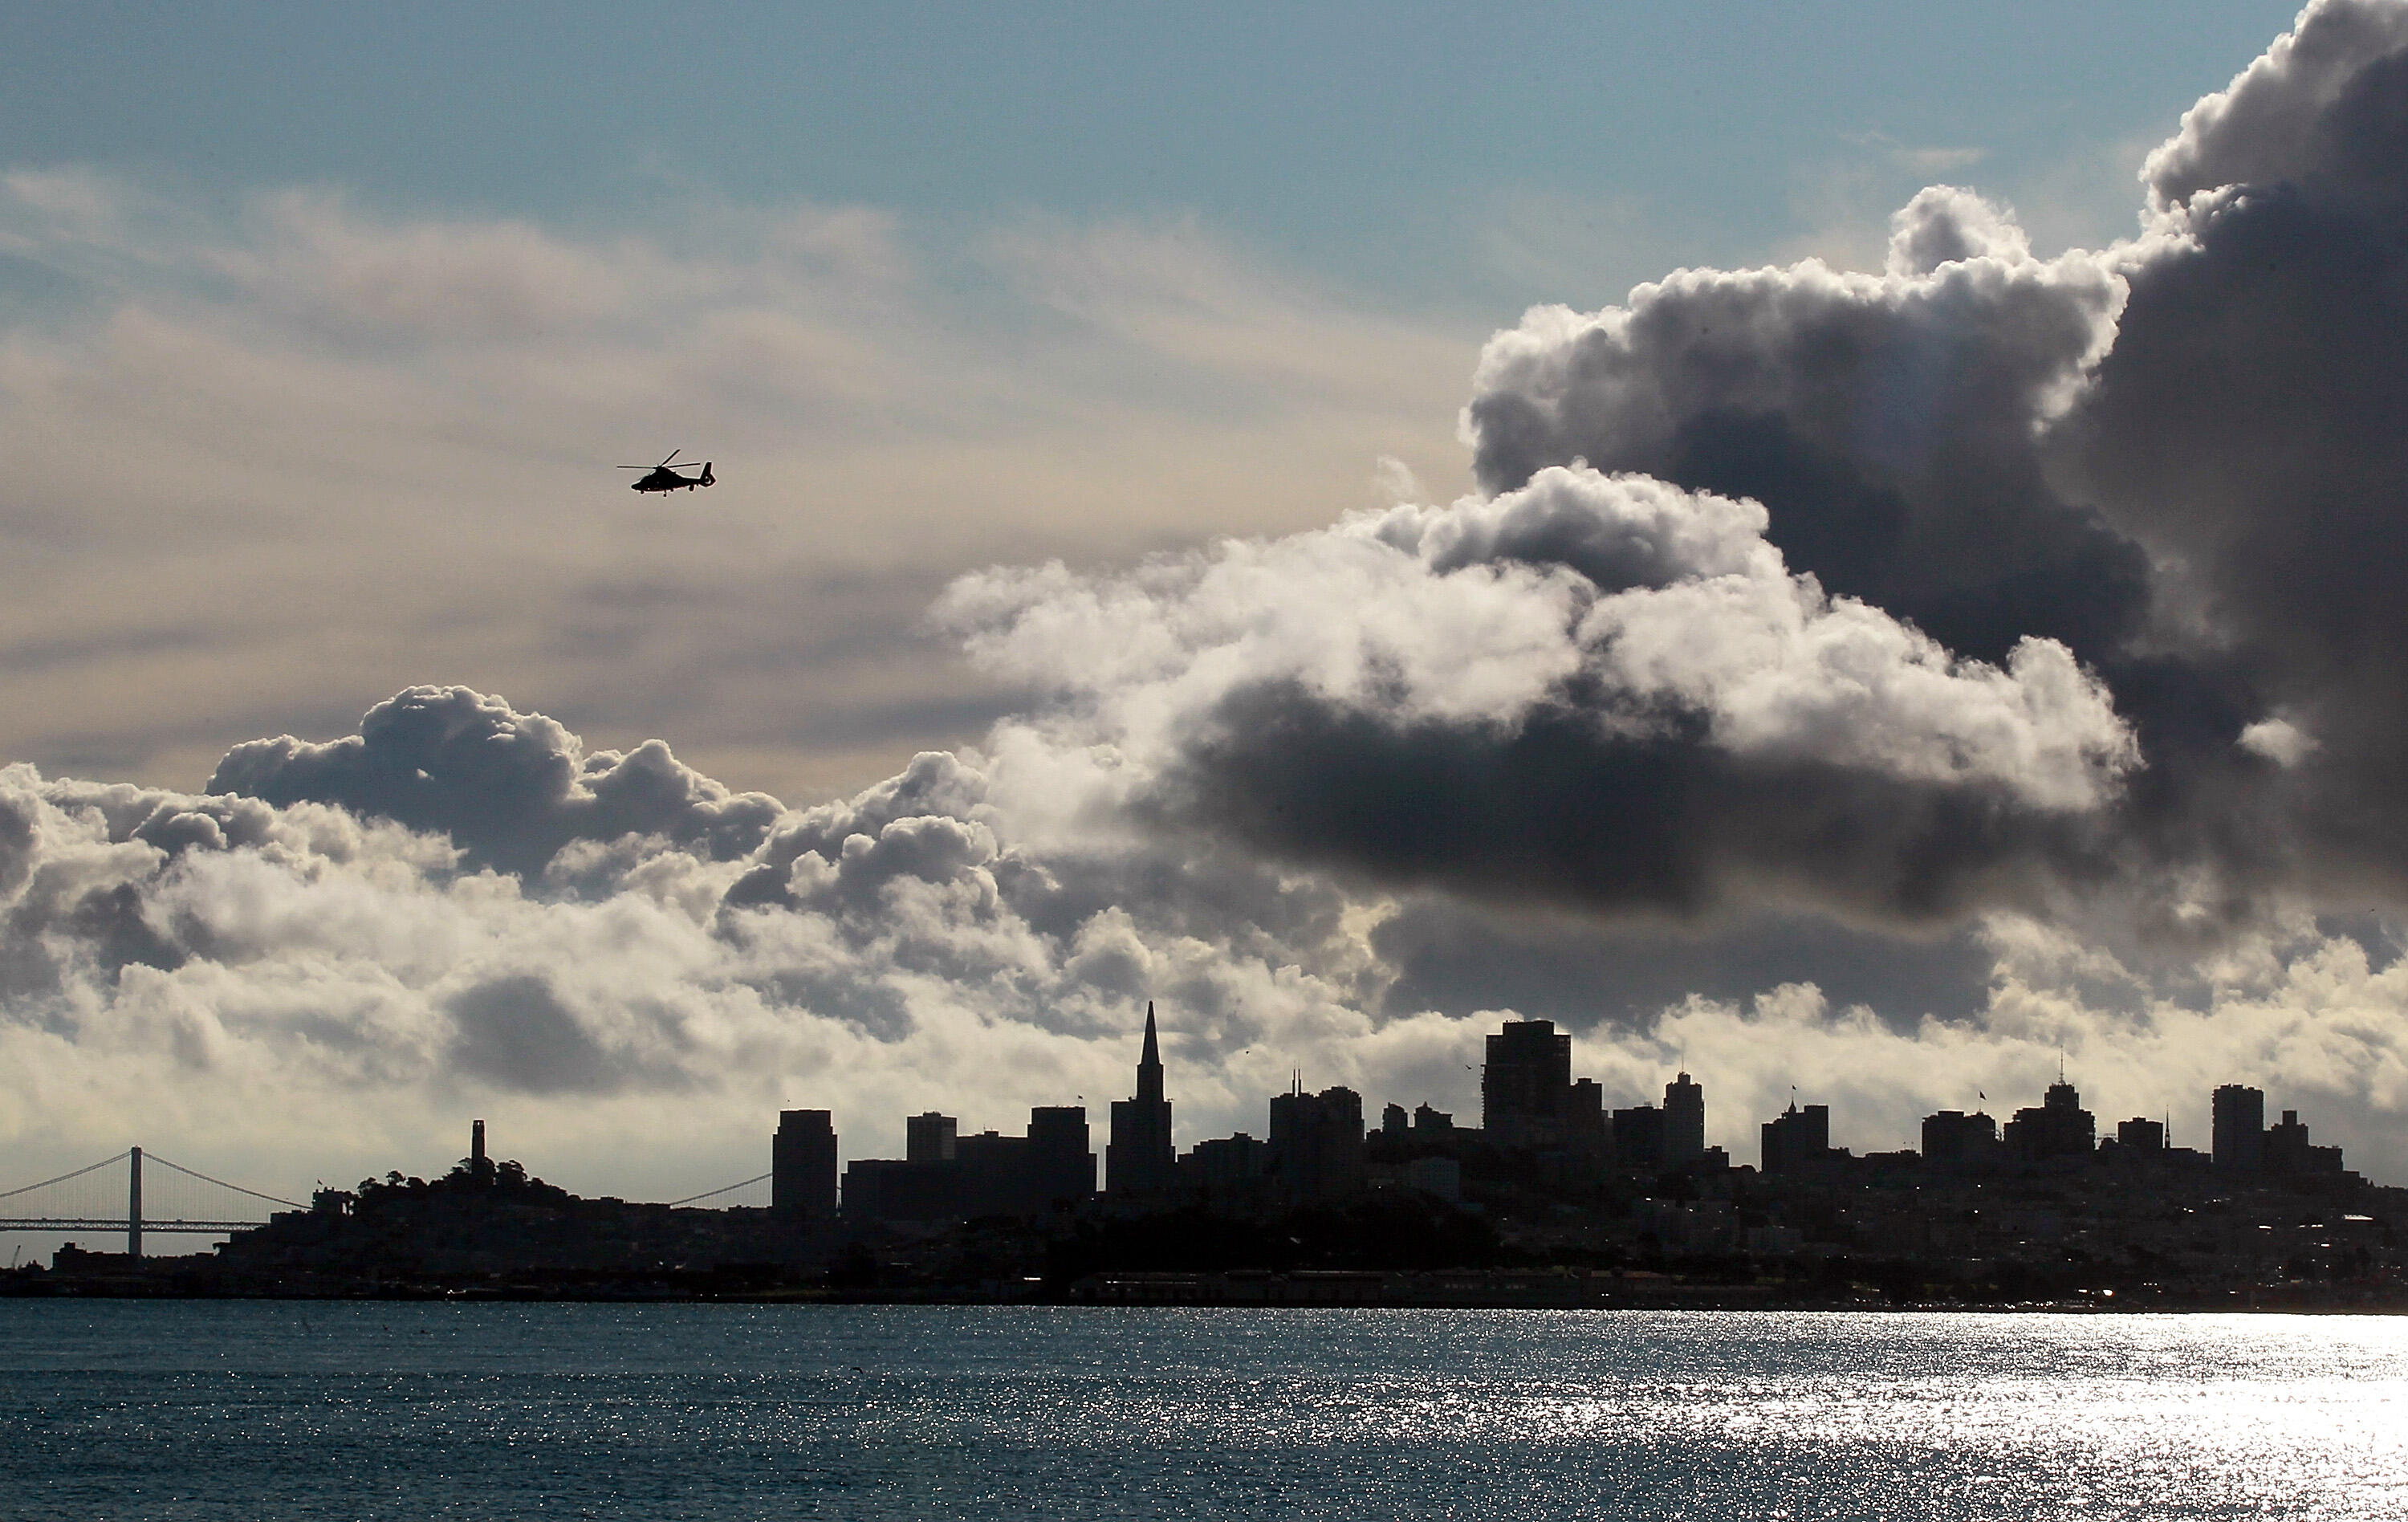 SAUSALITO, CA - NOVEMBER 04:  Clouds pass over the San Francisco skyline on November 4, 2011 in Sausalito, California. The San Francisco Bay Area will see mostly cloudy skies that will lead to a chance of showers in the afternoon. Daytime highs will reach